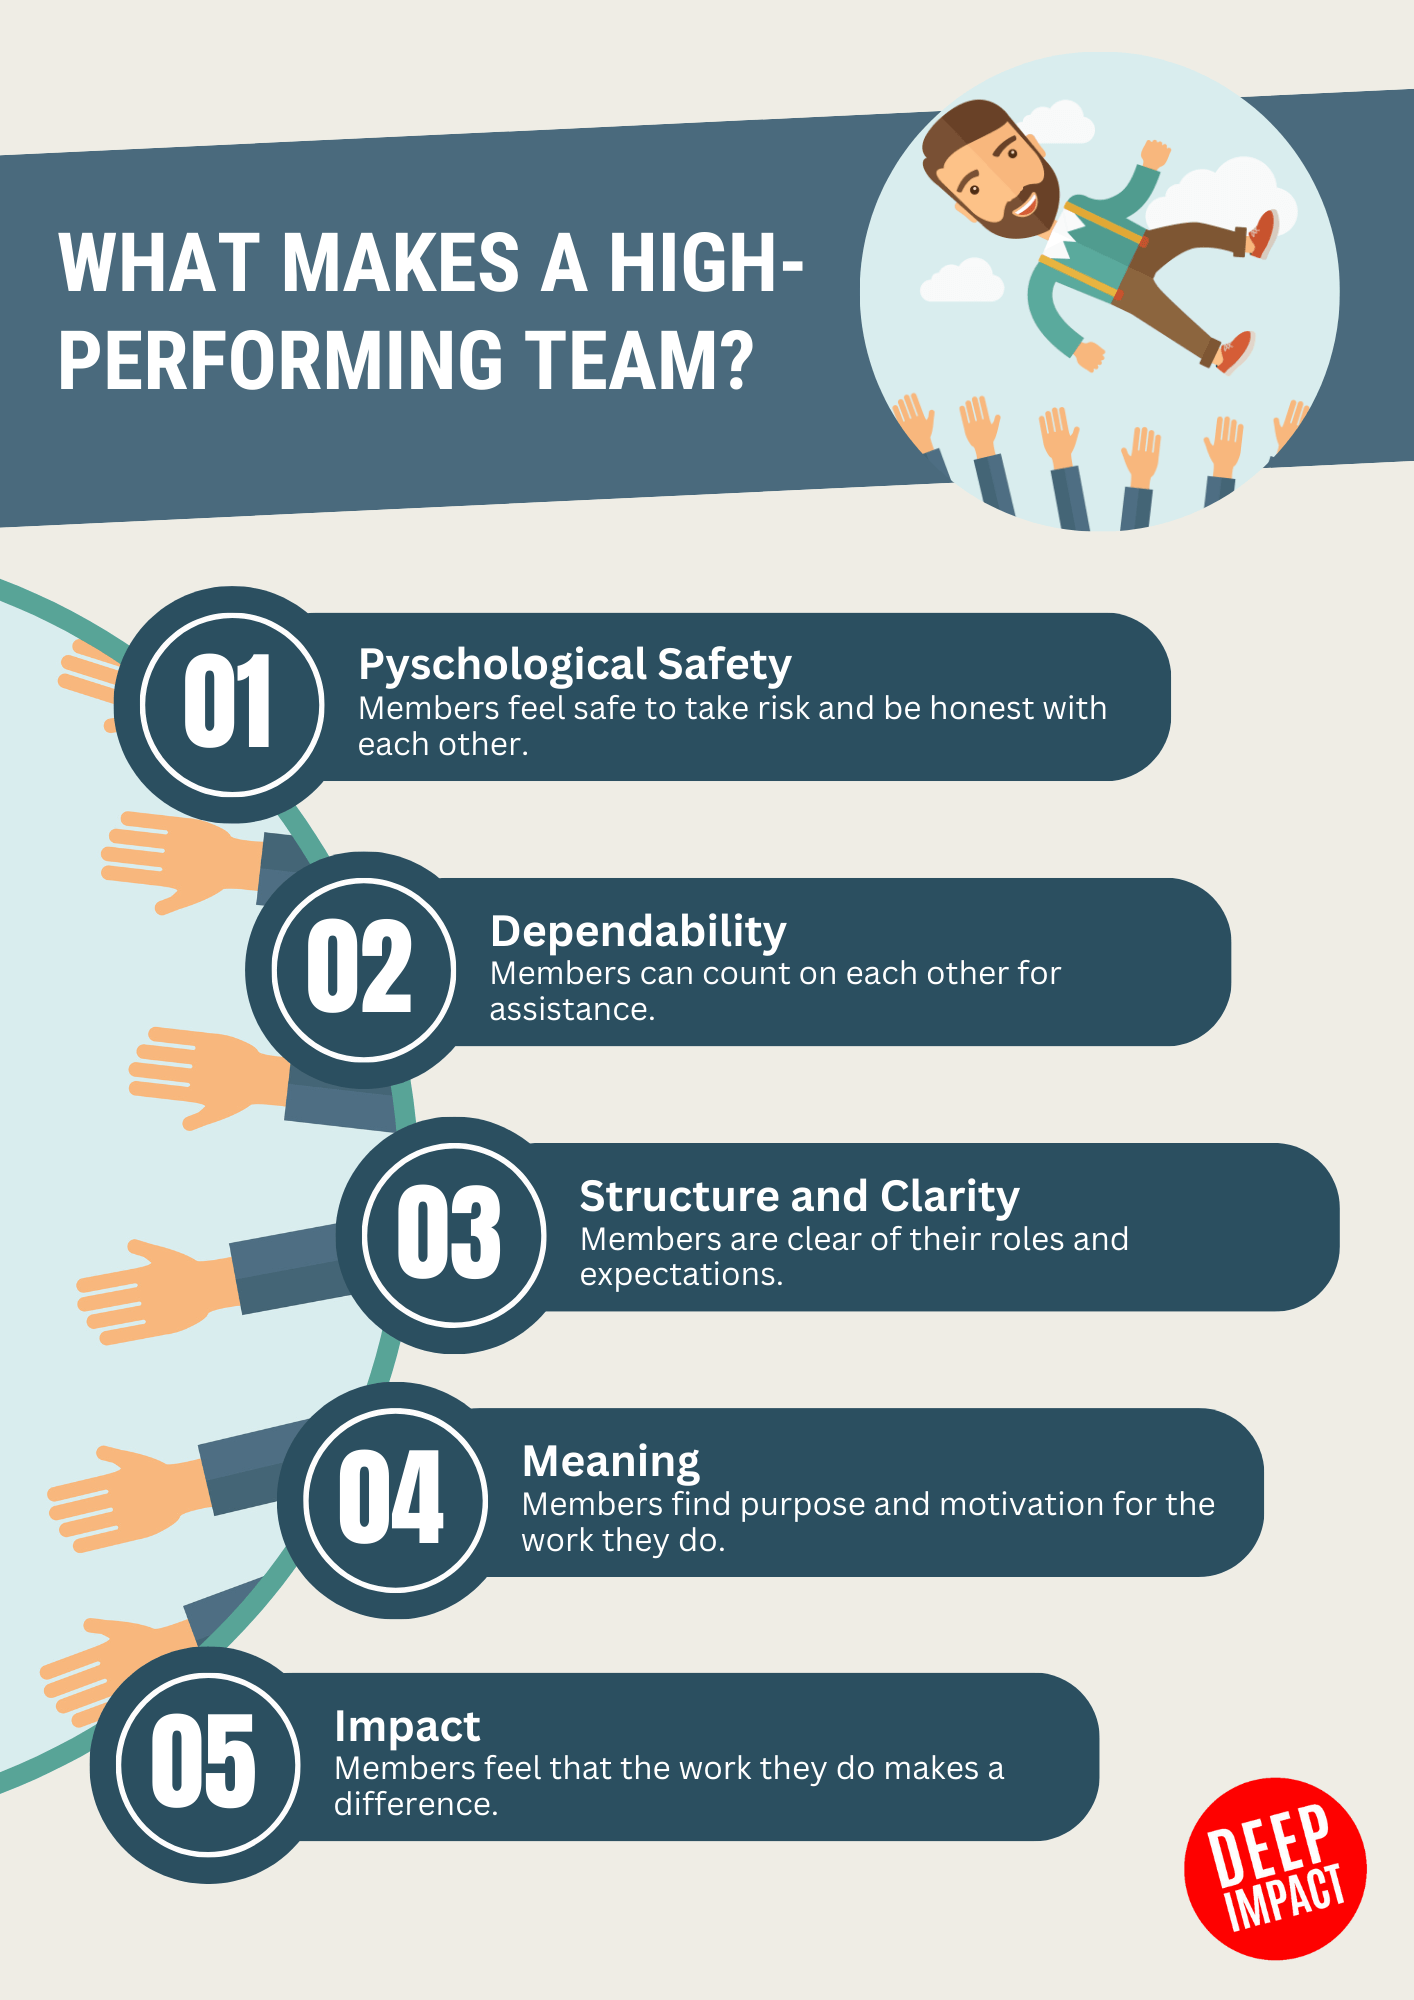 high-performing team according to project aristotle